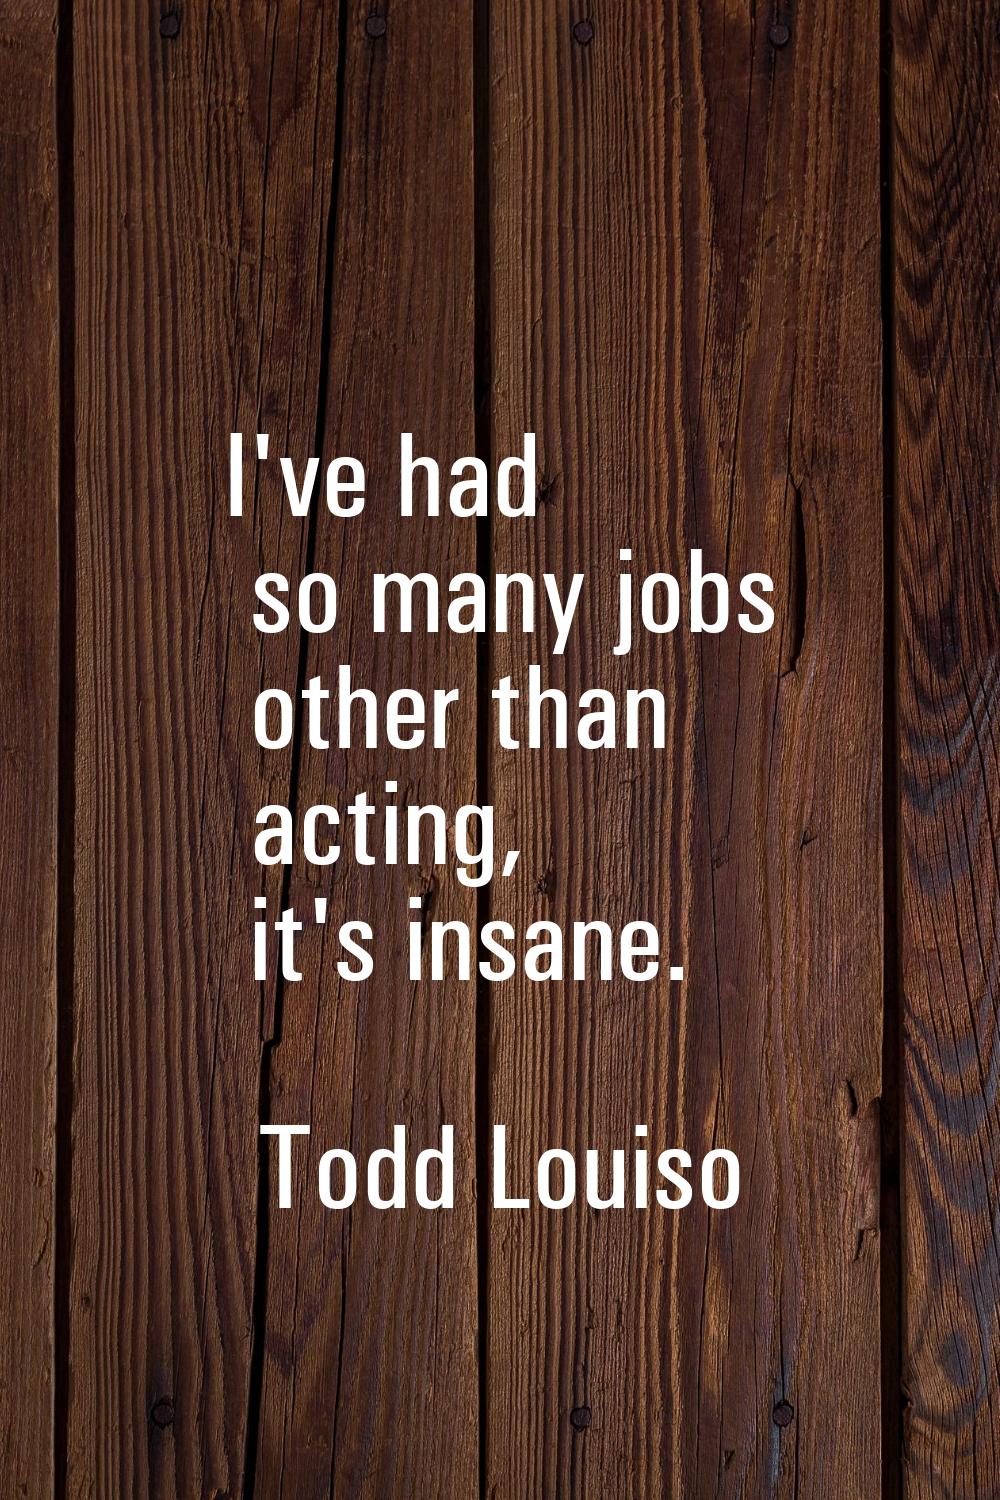 I've had so many jobs other than acting, it's insane.